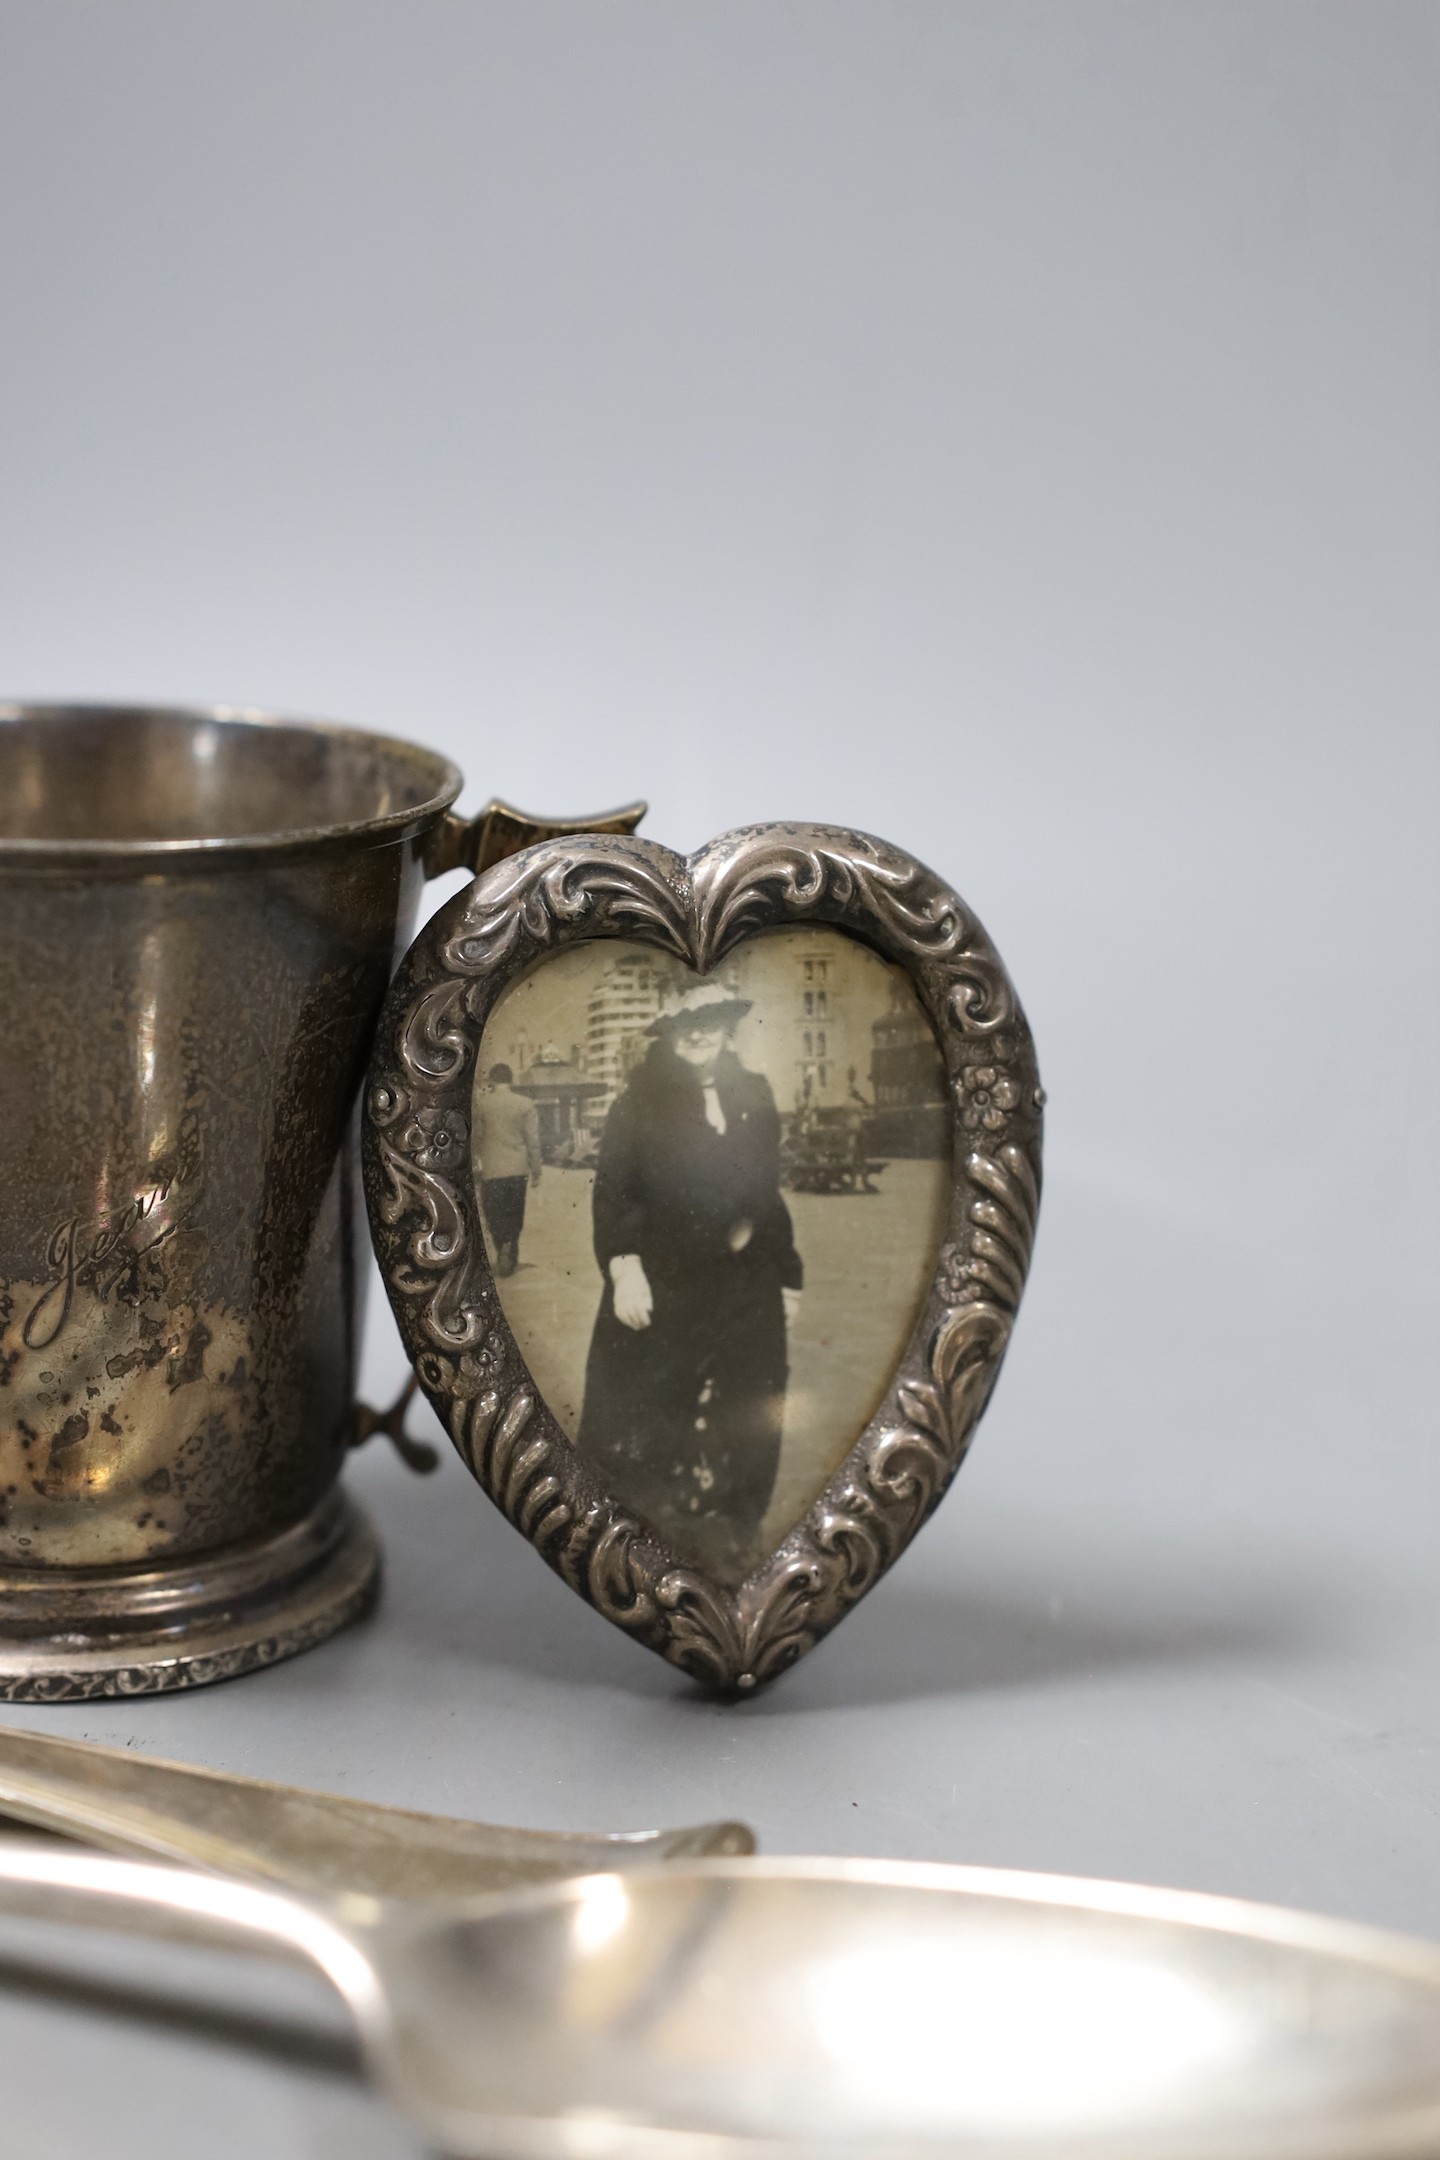 Two 18th century silver spoons, a later silver christening mug, small silver mounted heart shaped photograph frame, a silver napkin ring and a silver handled button hook.